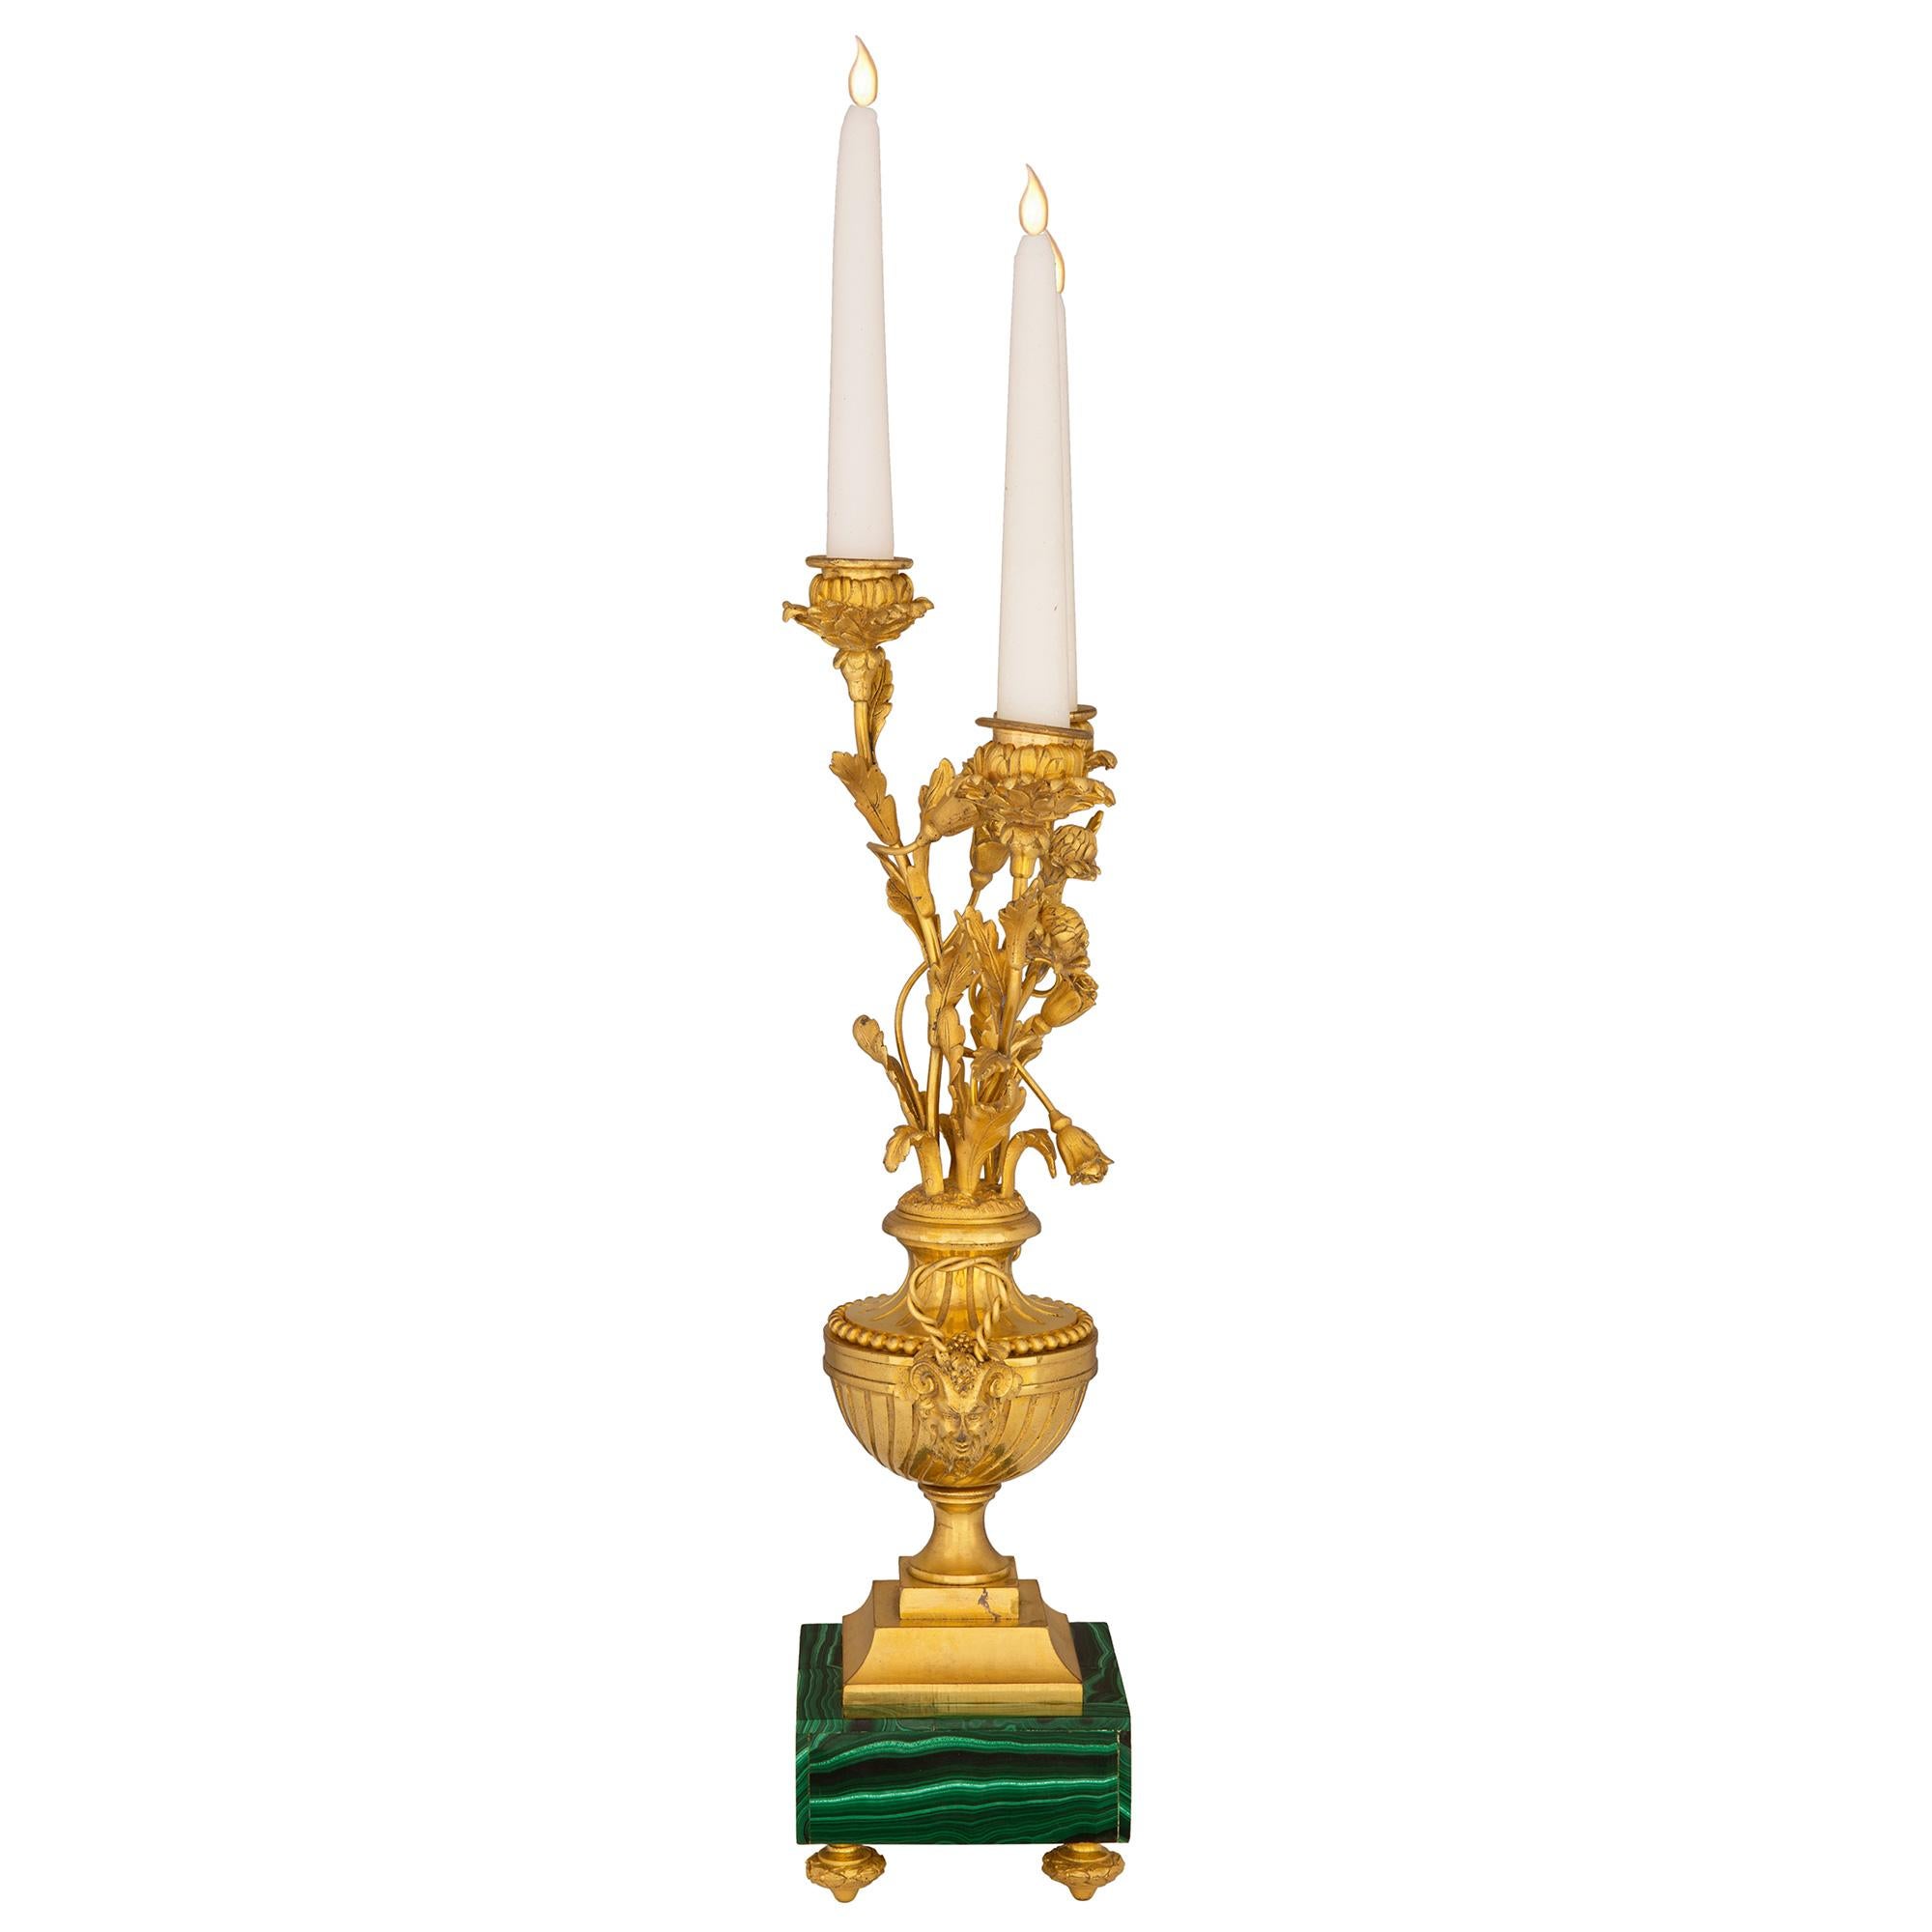 An outstanding and high quality pair of French mid 19th century Louis XVI st. ormolu and Malachite three arm candelabras. Each candelabra is raised by a square Malachite base with fine topie shaped ormolu feet. The square shaped stepped central